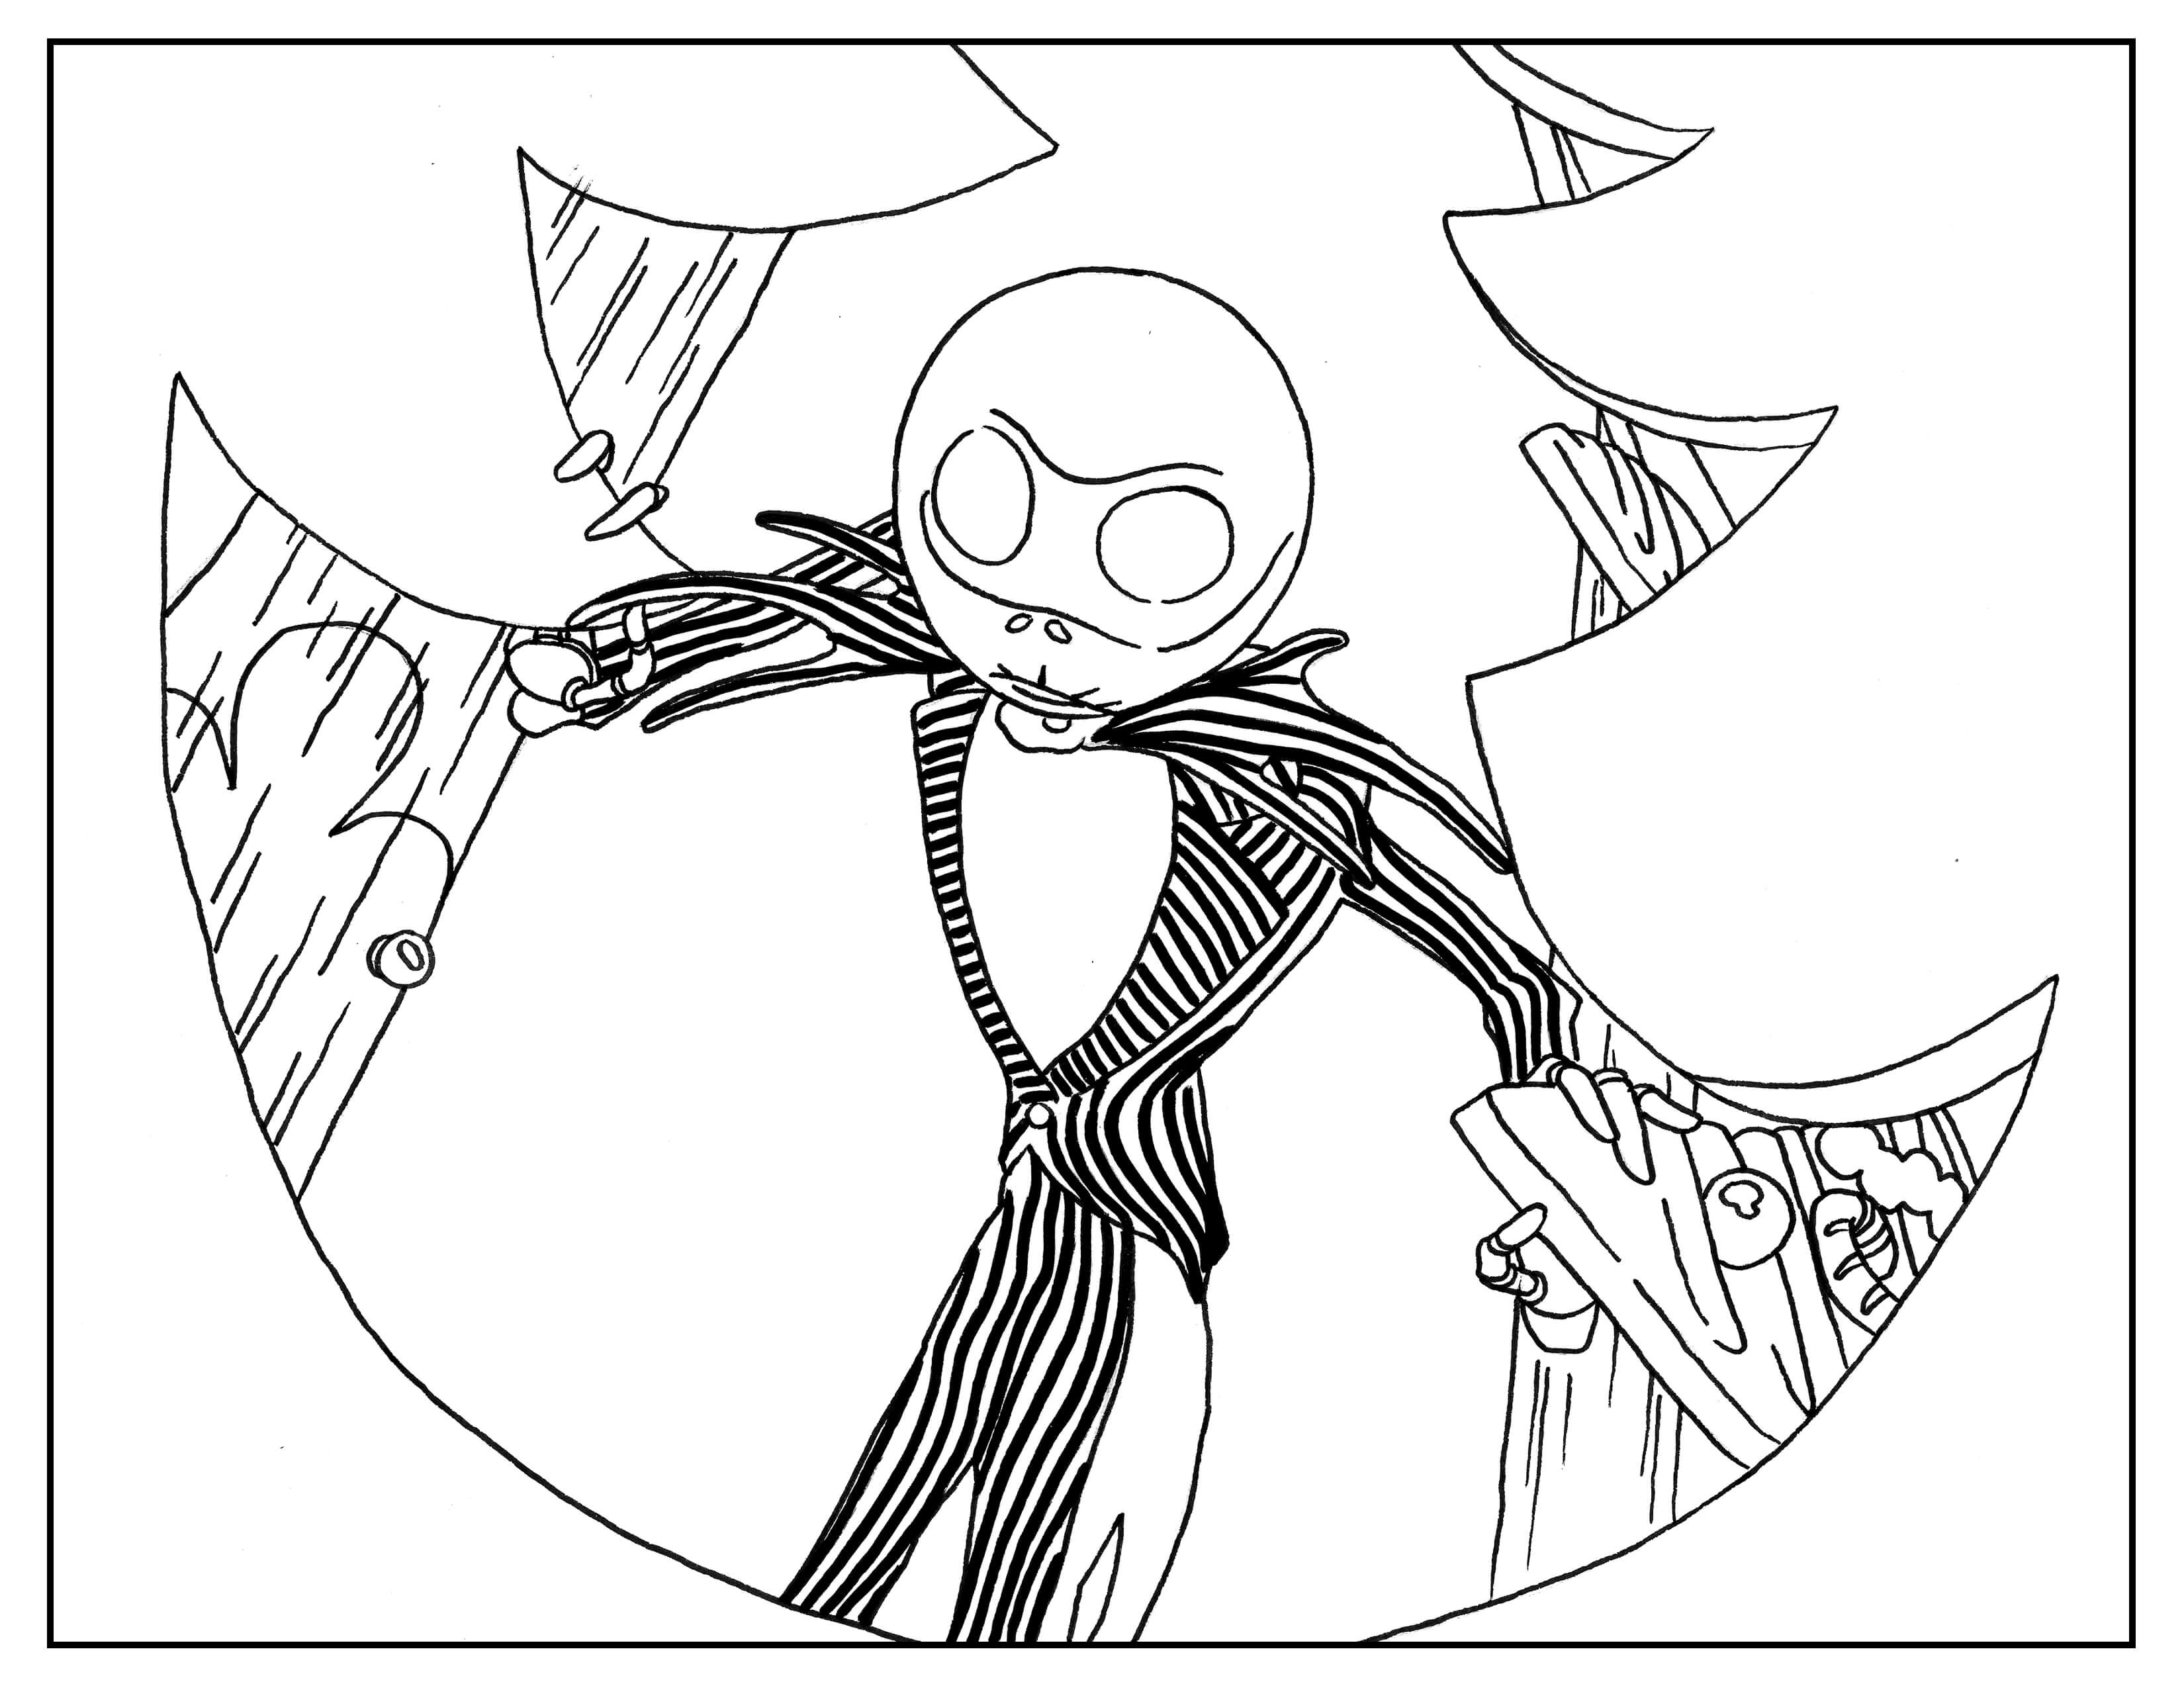 Movies - Coloring pages for adults